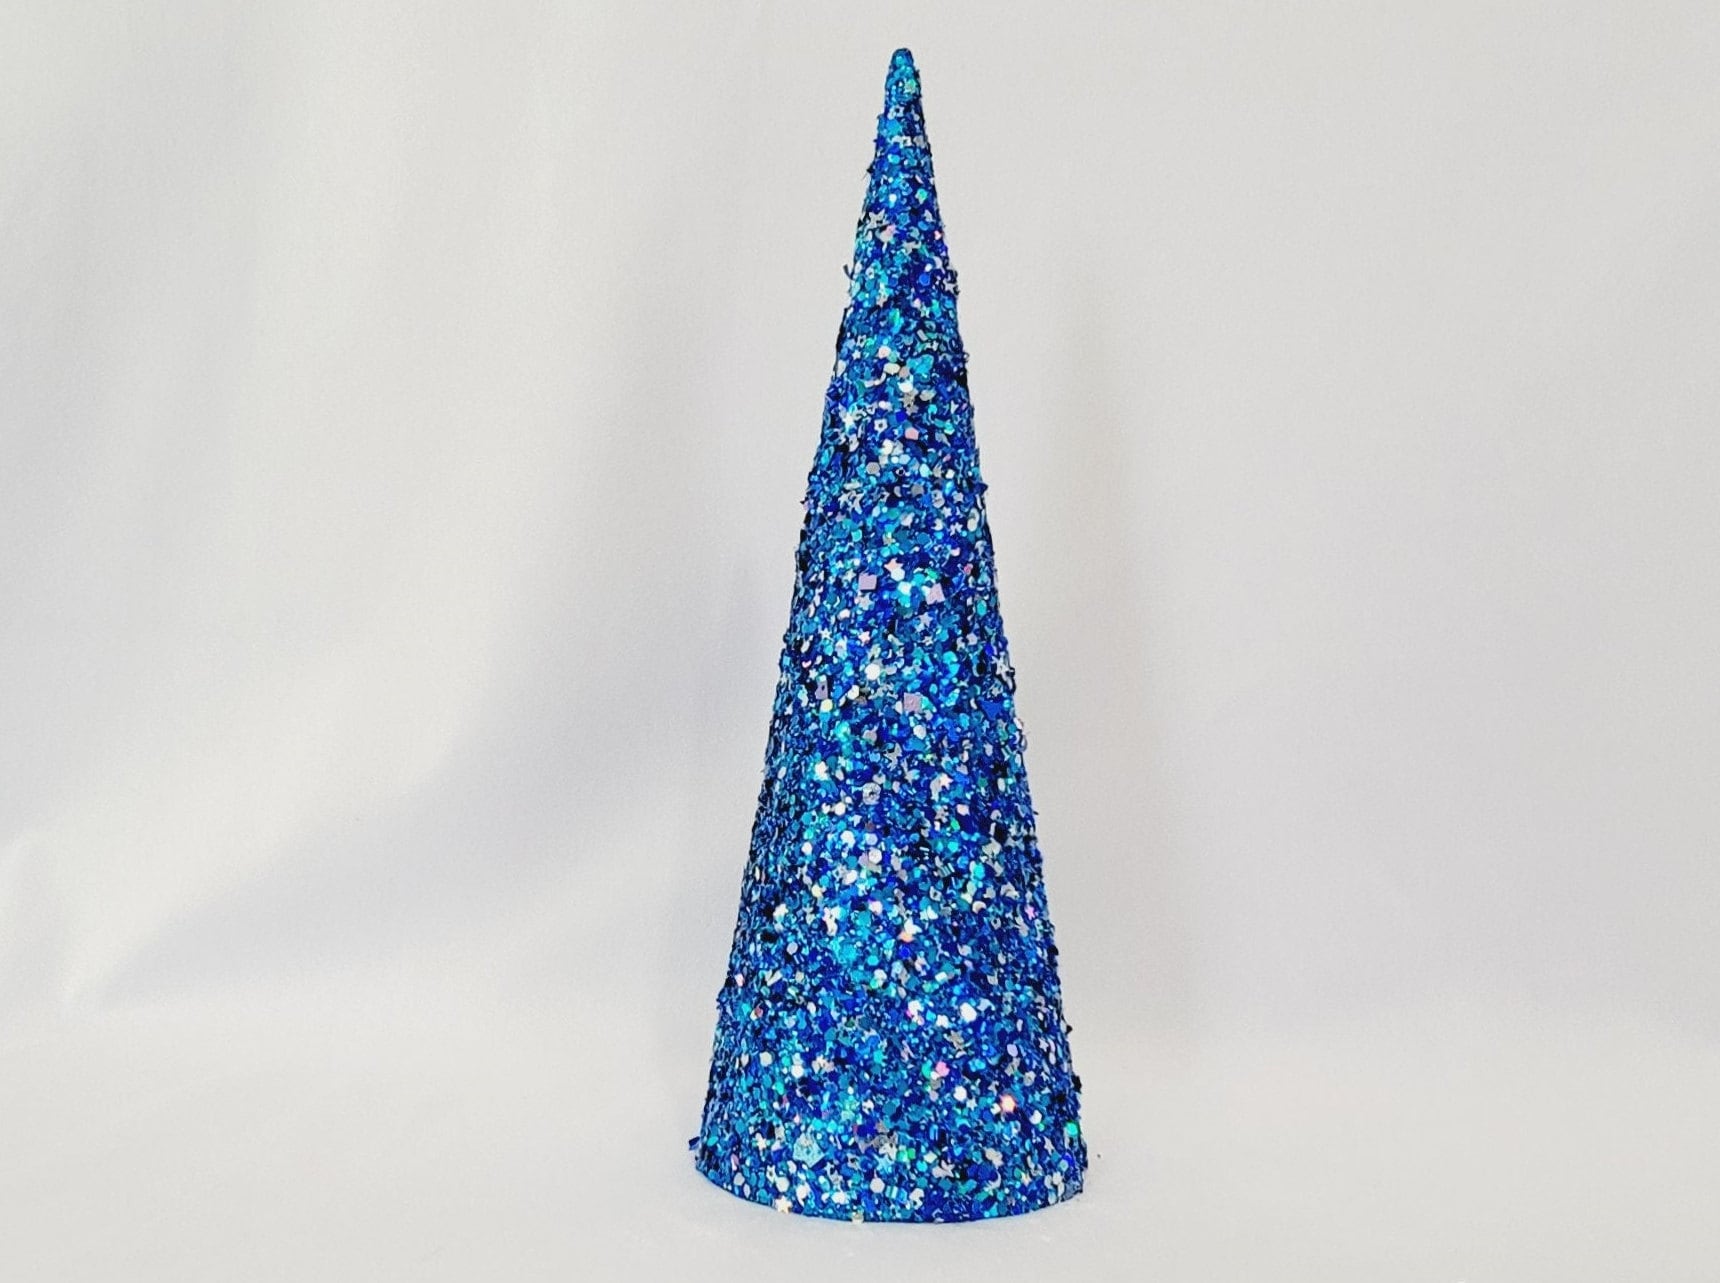 PRETYZOOM Craft Foam 2pcs Foam Cones for Crafts Polystyrene Cone Large  Christmas Tree Cone Foam Shape Statue for DIY Craft Project Christmas Tree  Table Centerpiece Polystyrene Wreath Rings 30cm : : Home